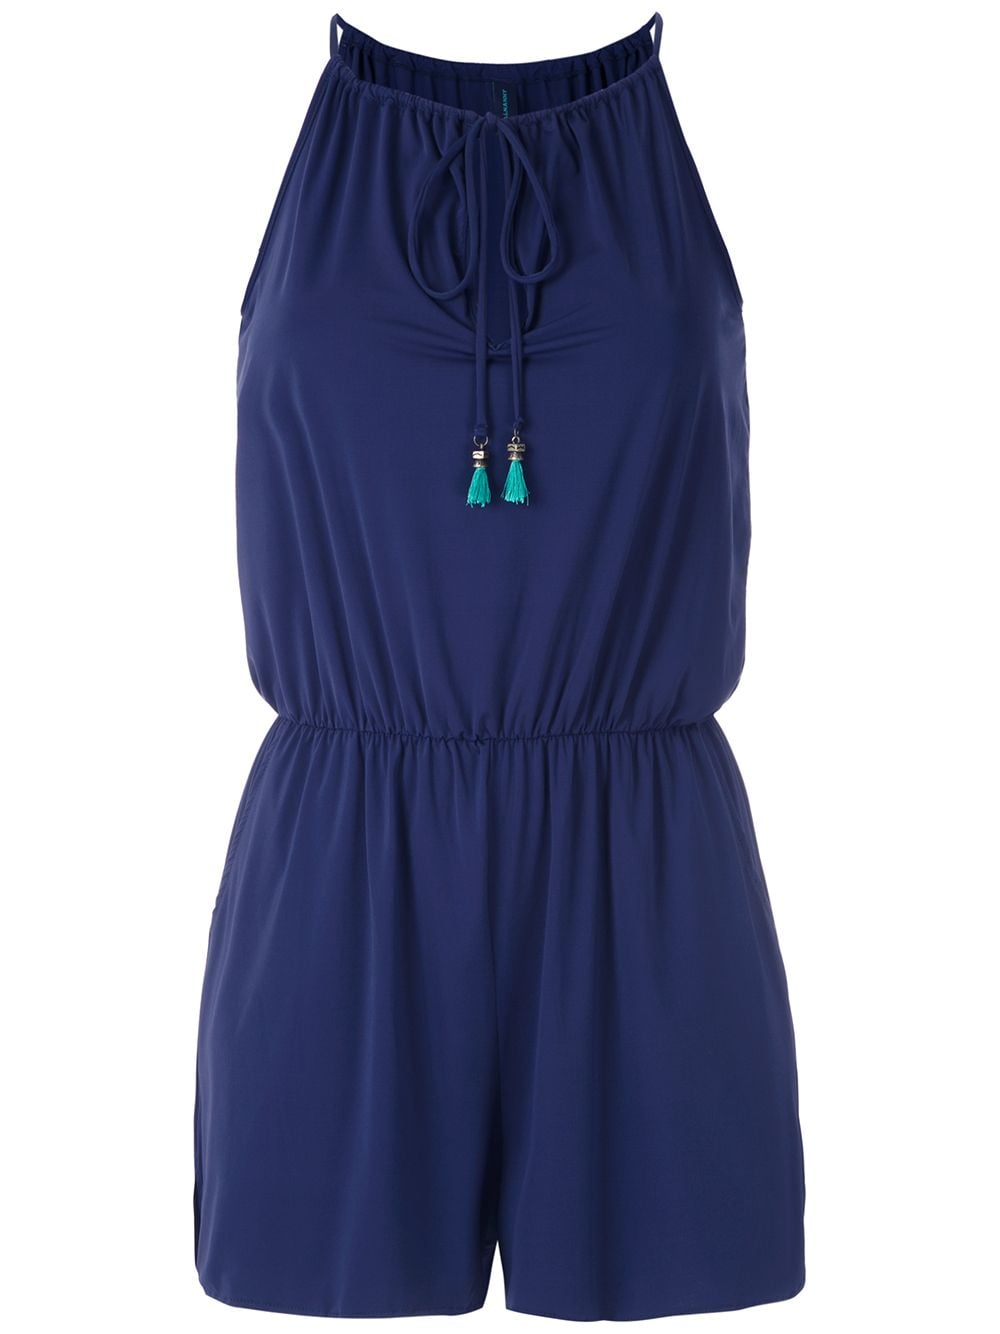 Image 1 of Never miss a thing Laya UV playsuit